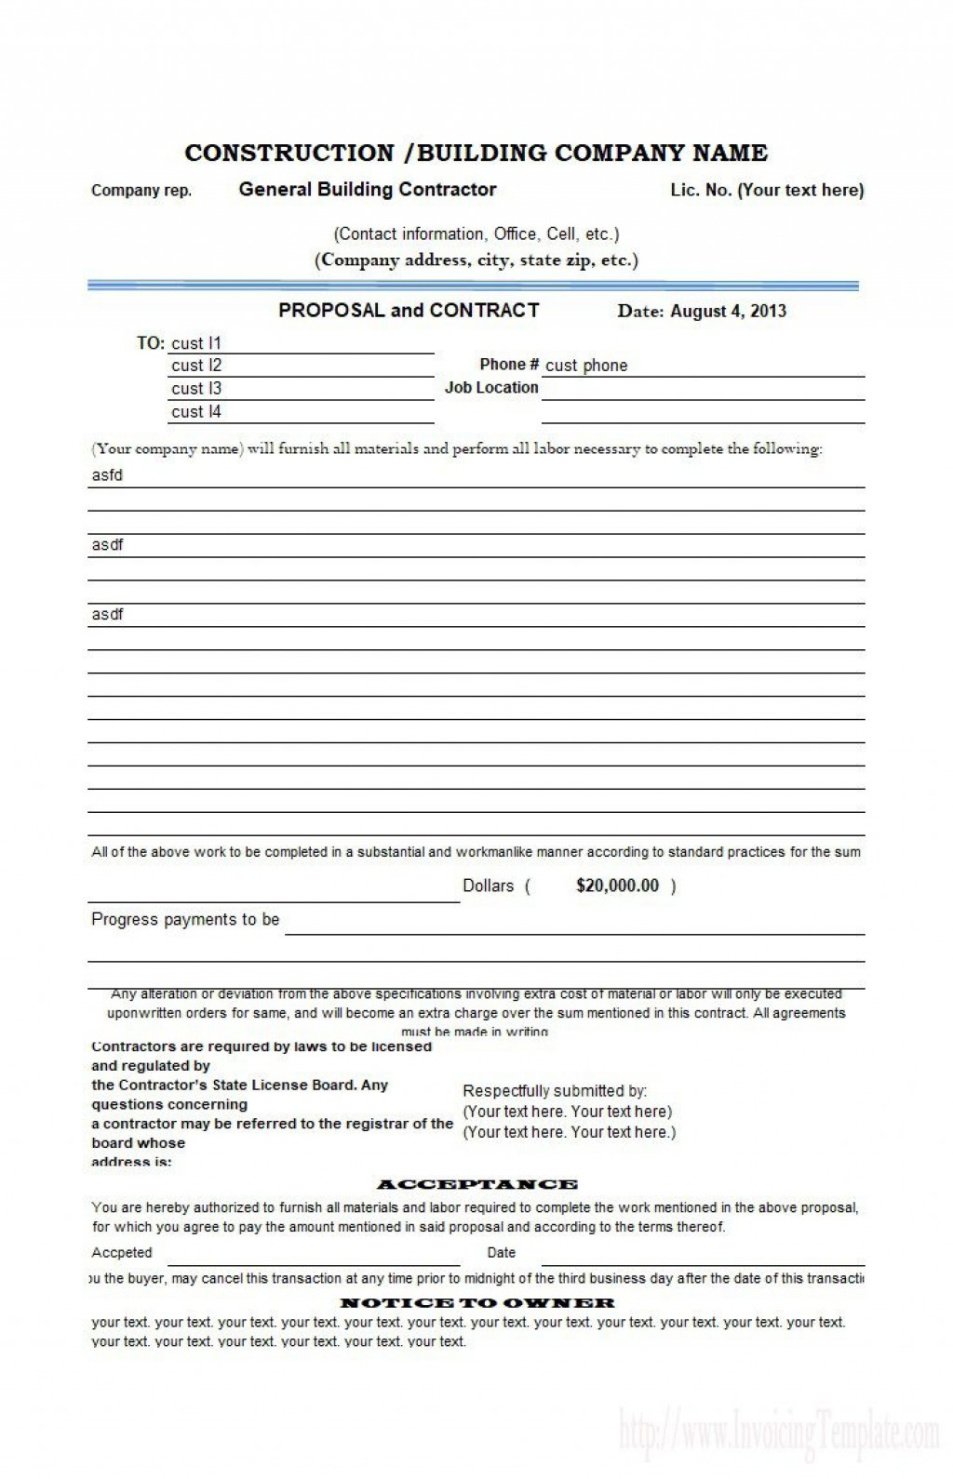 Professional General Agreement Construction Contract Template Pdf